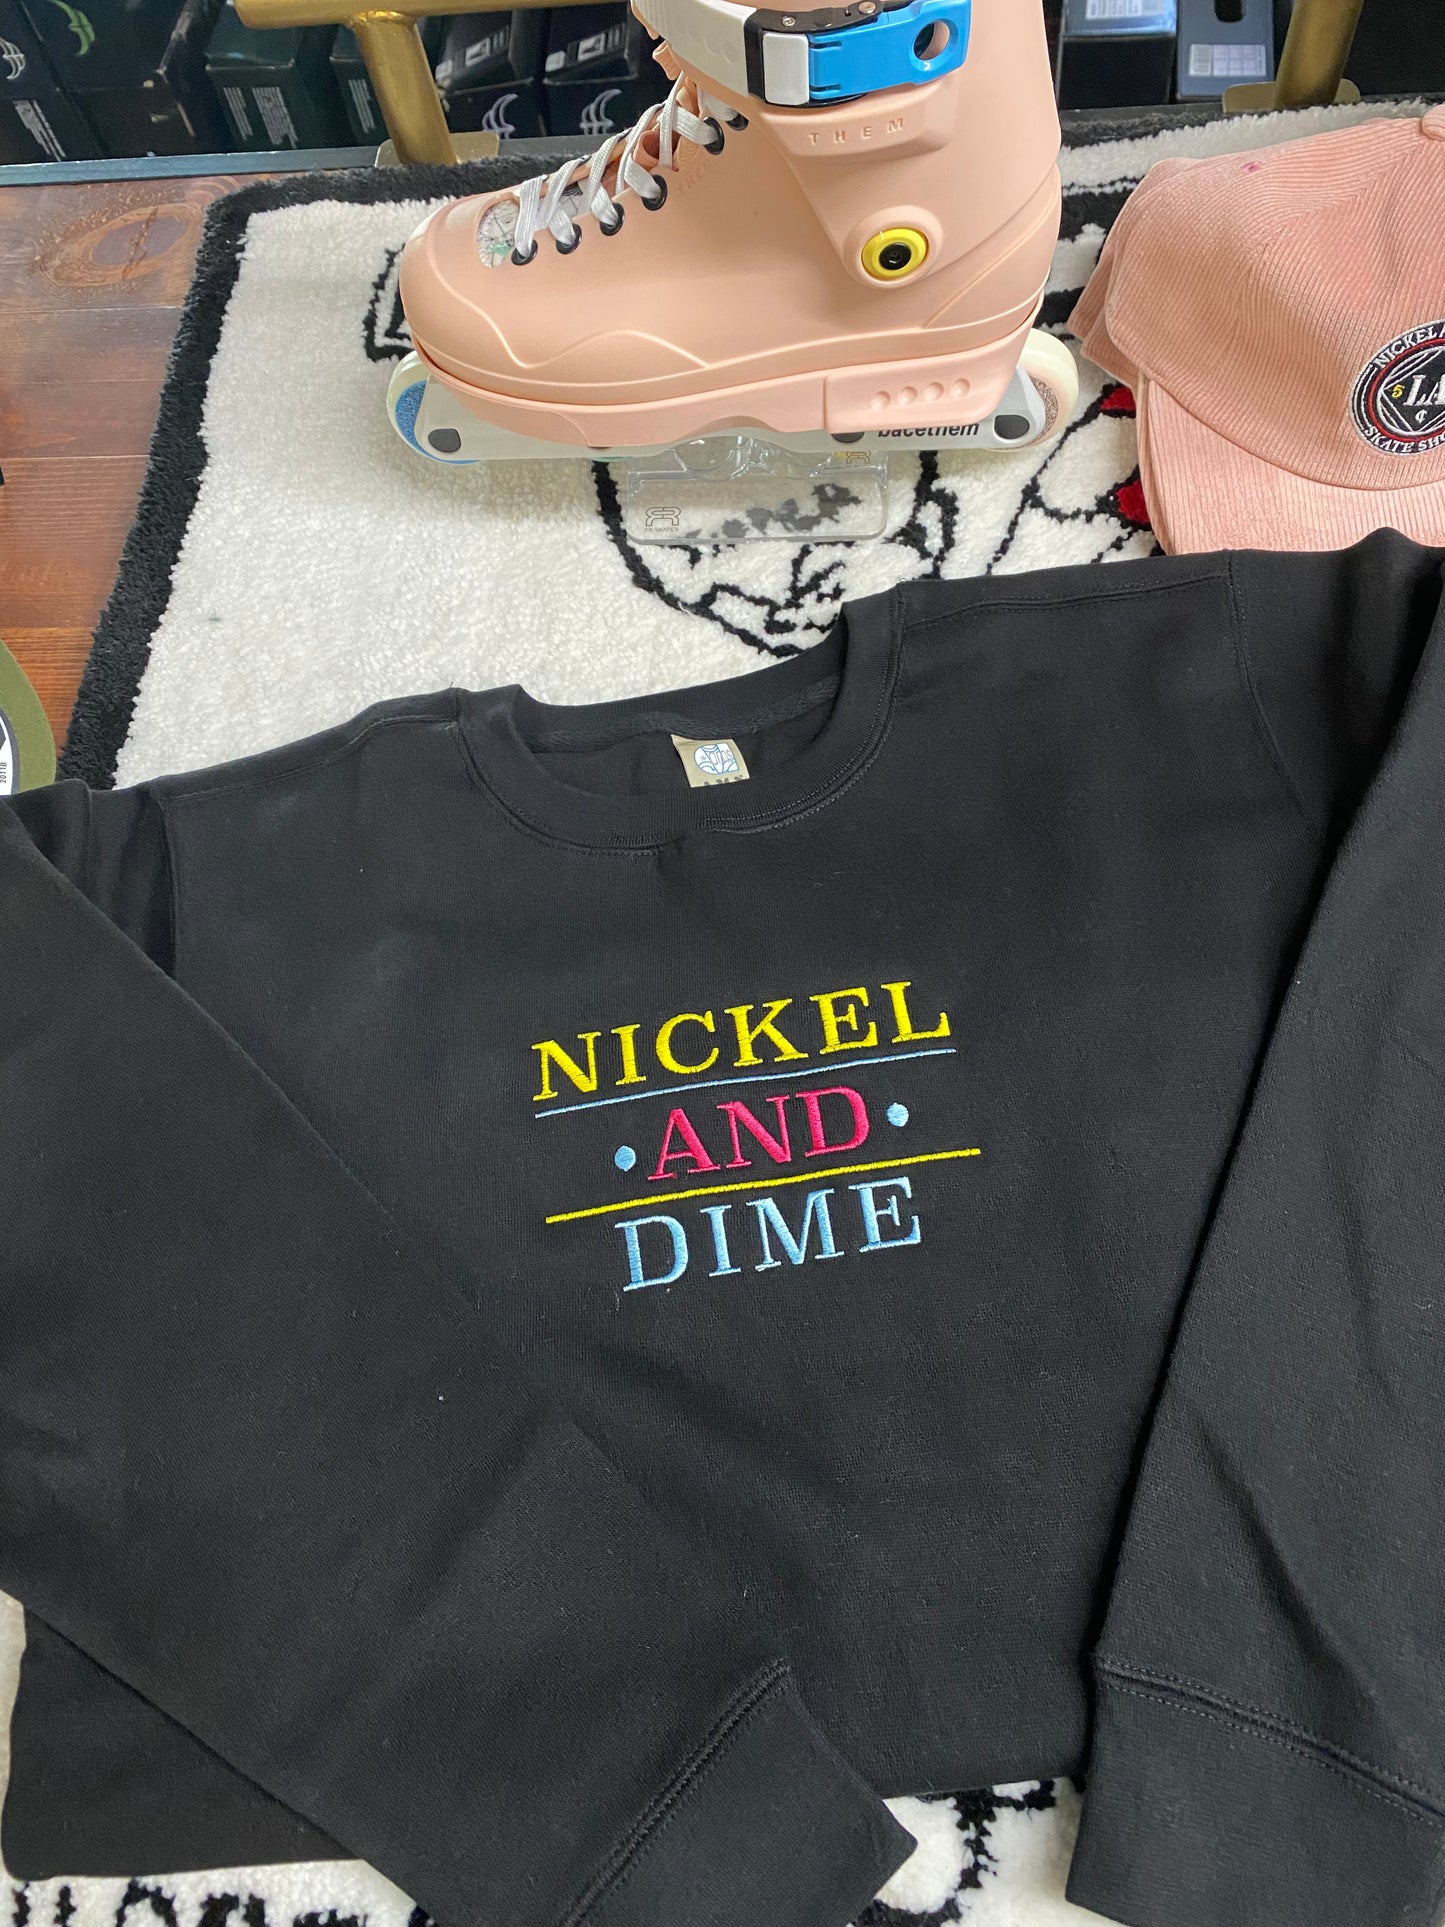 Nickel and Dime Skate Shop Blader Years crew neck sweater